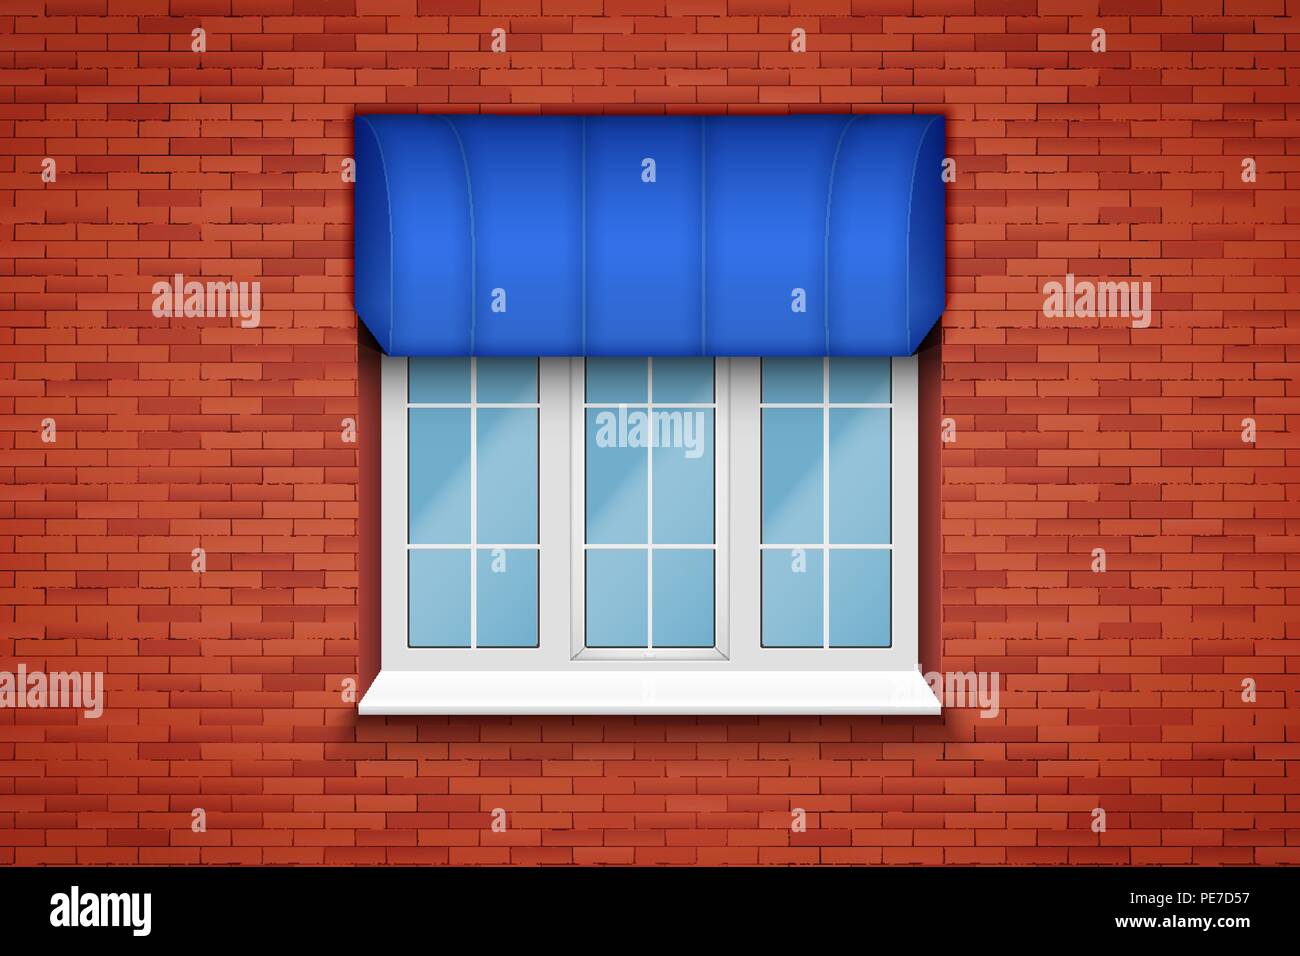 PVC window with awning Stock Vector